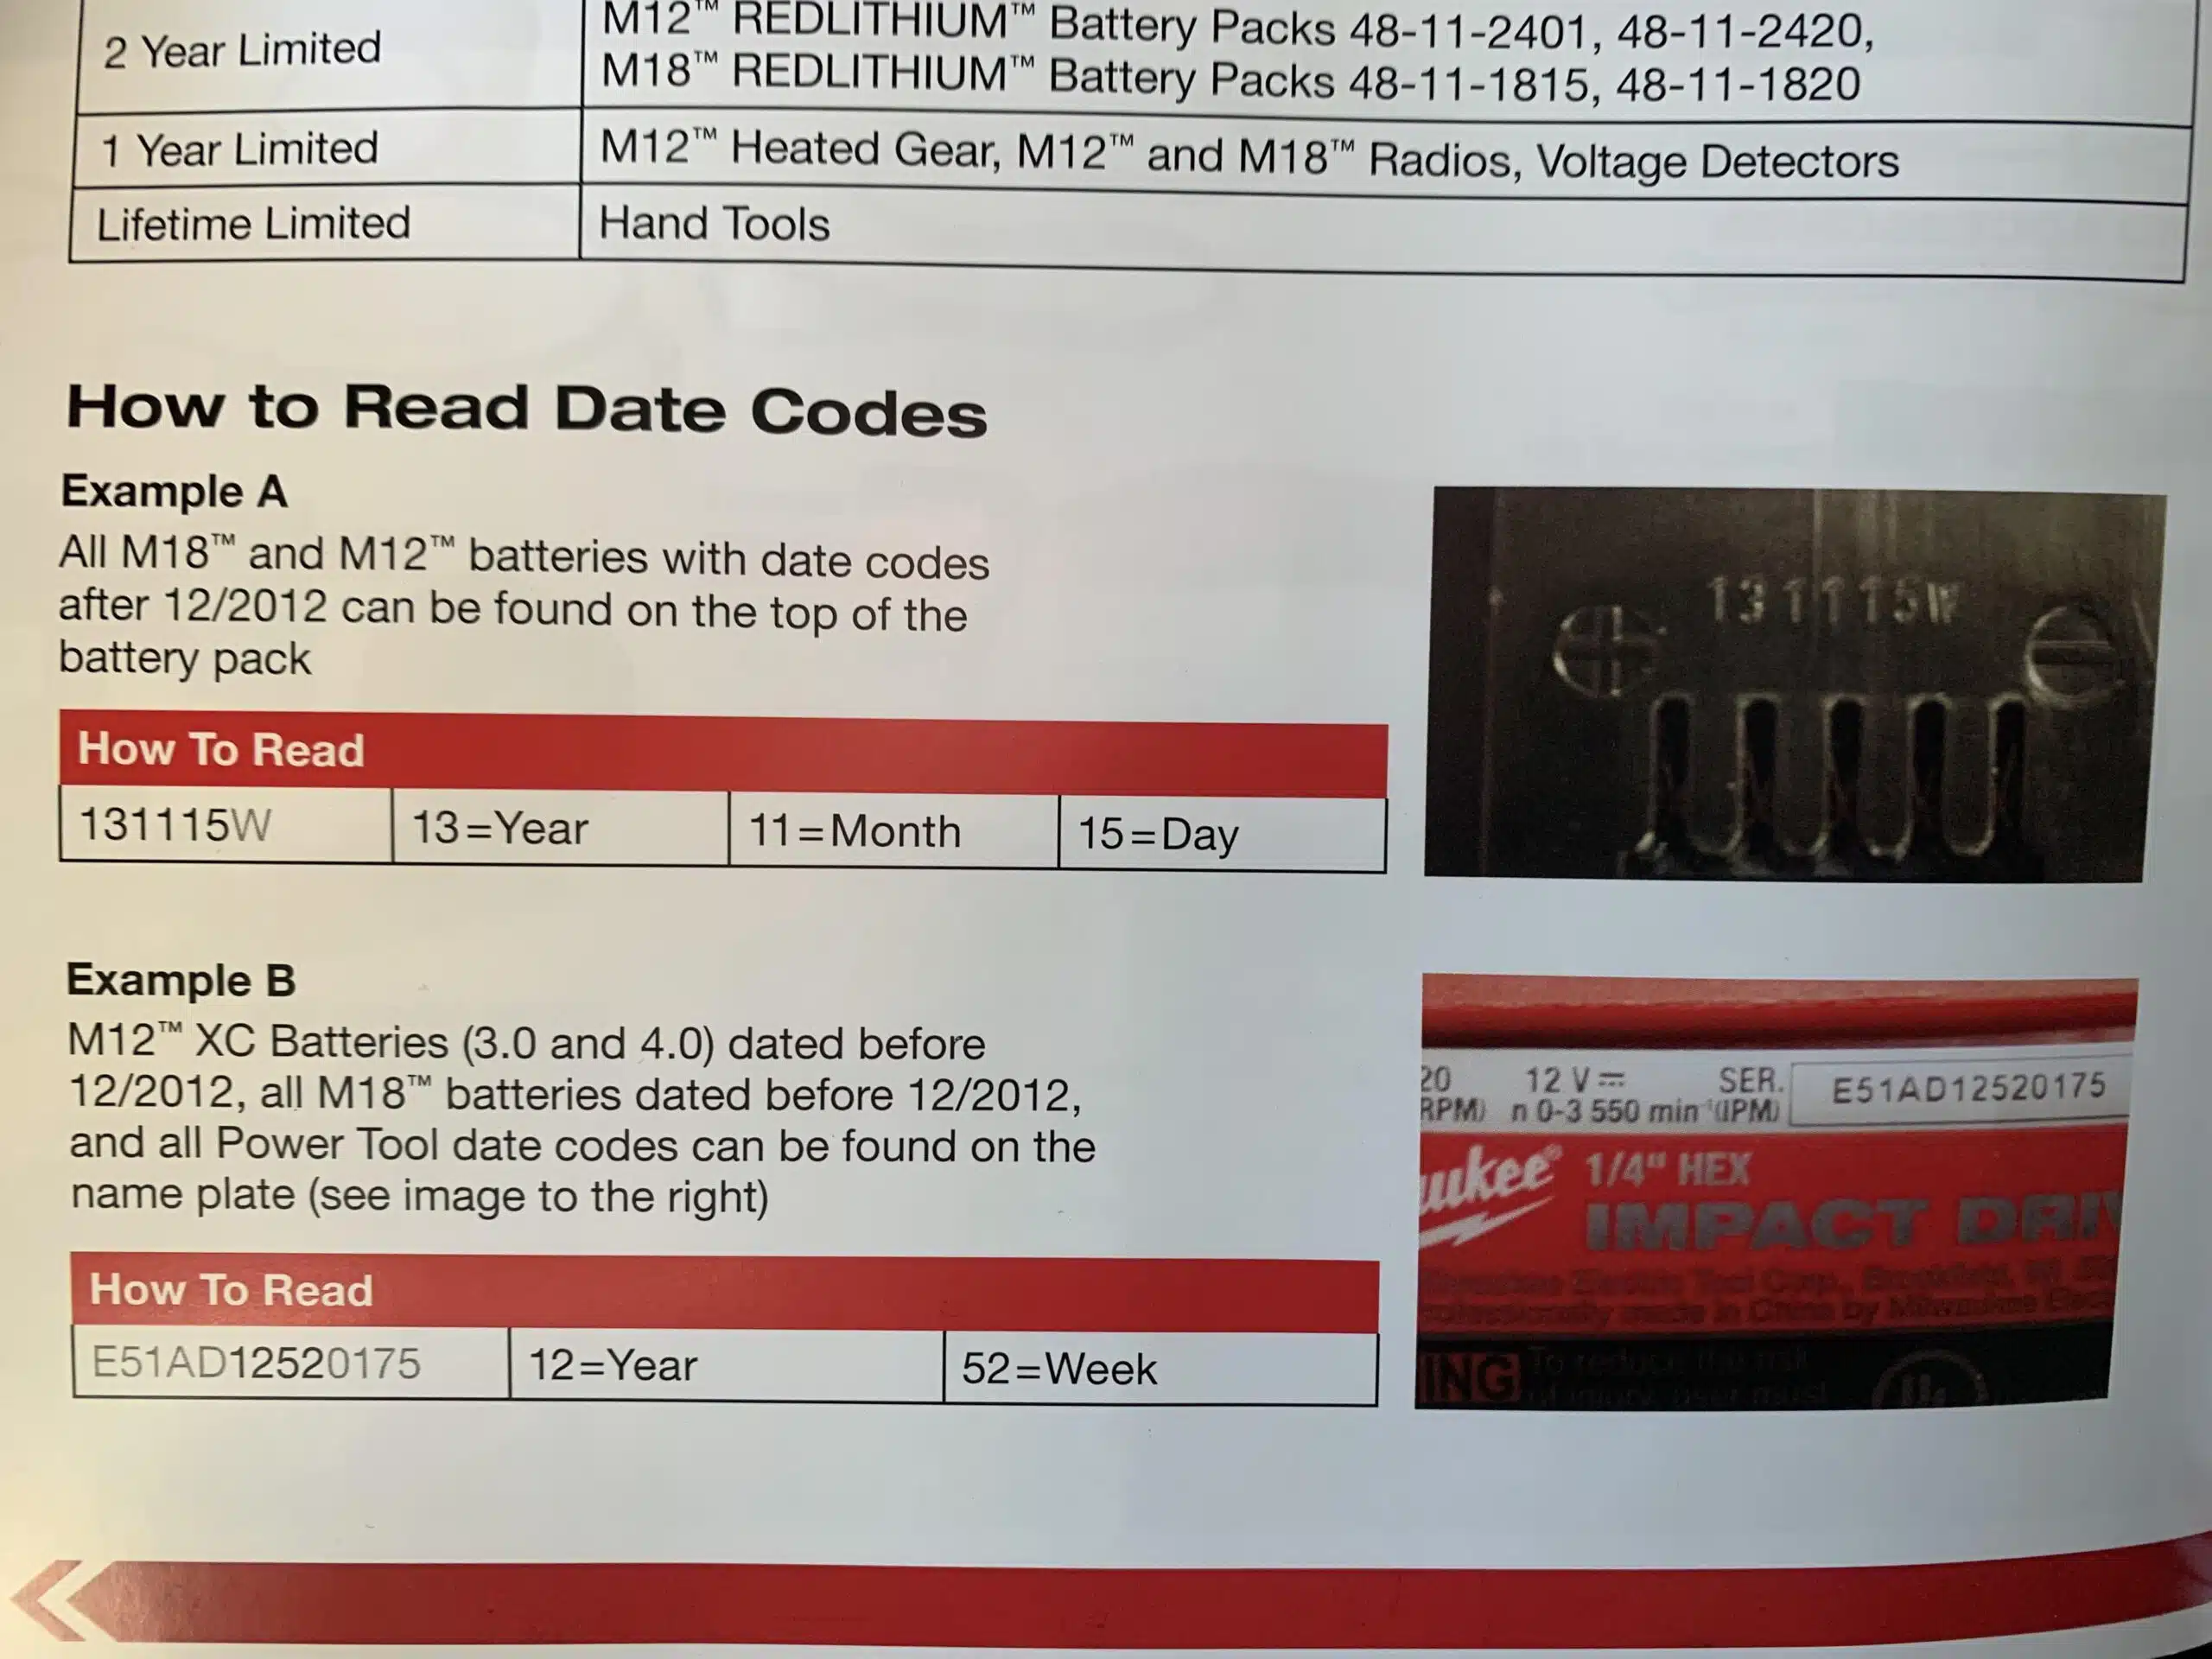 How Do You Determine the Date Code of Milwaukee Cordless Drill